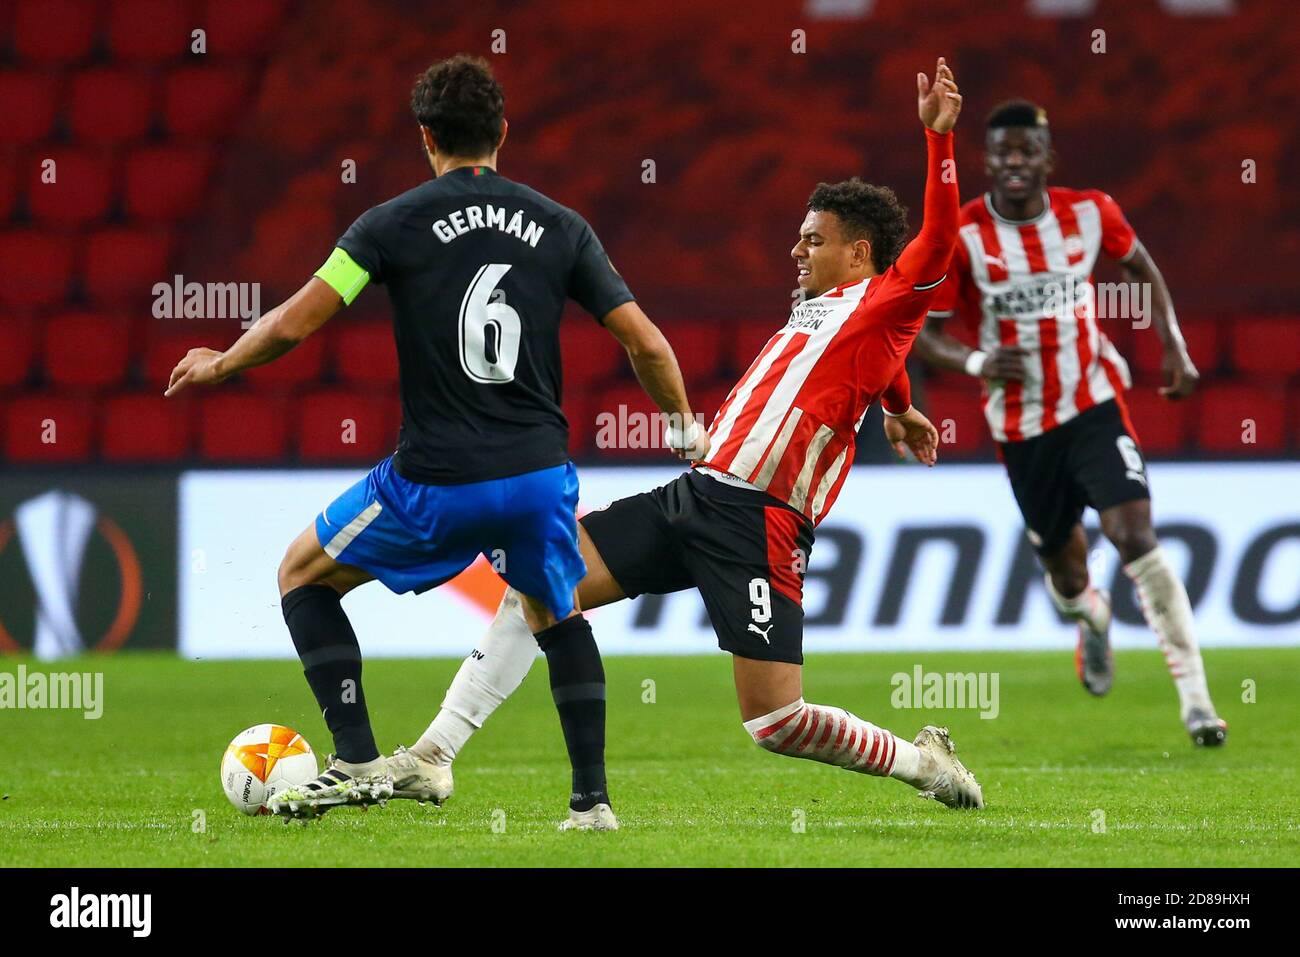 German of Granada, Donyell Malen of PSV Eindhoven during the UEFA Europa League, Group Stage, Group E football match between PSV Eindhoven and Grana C Stock Photo